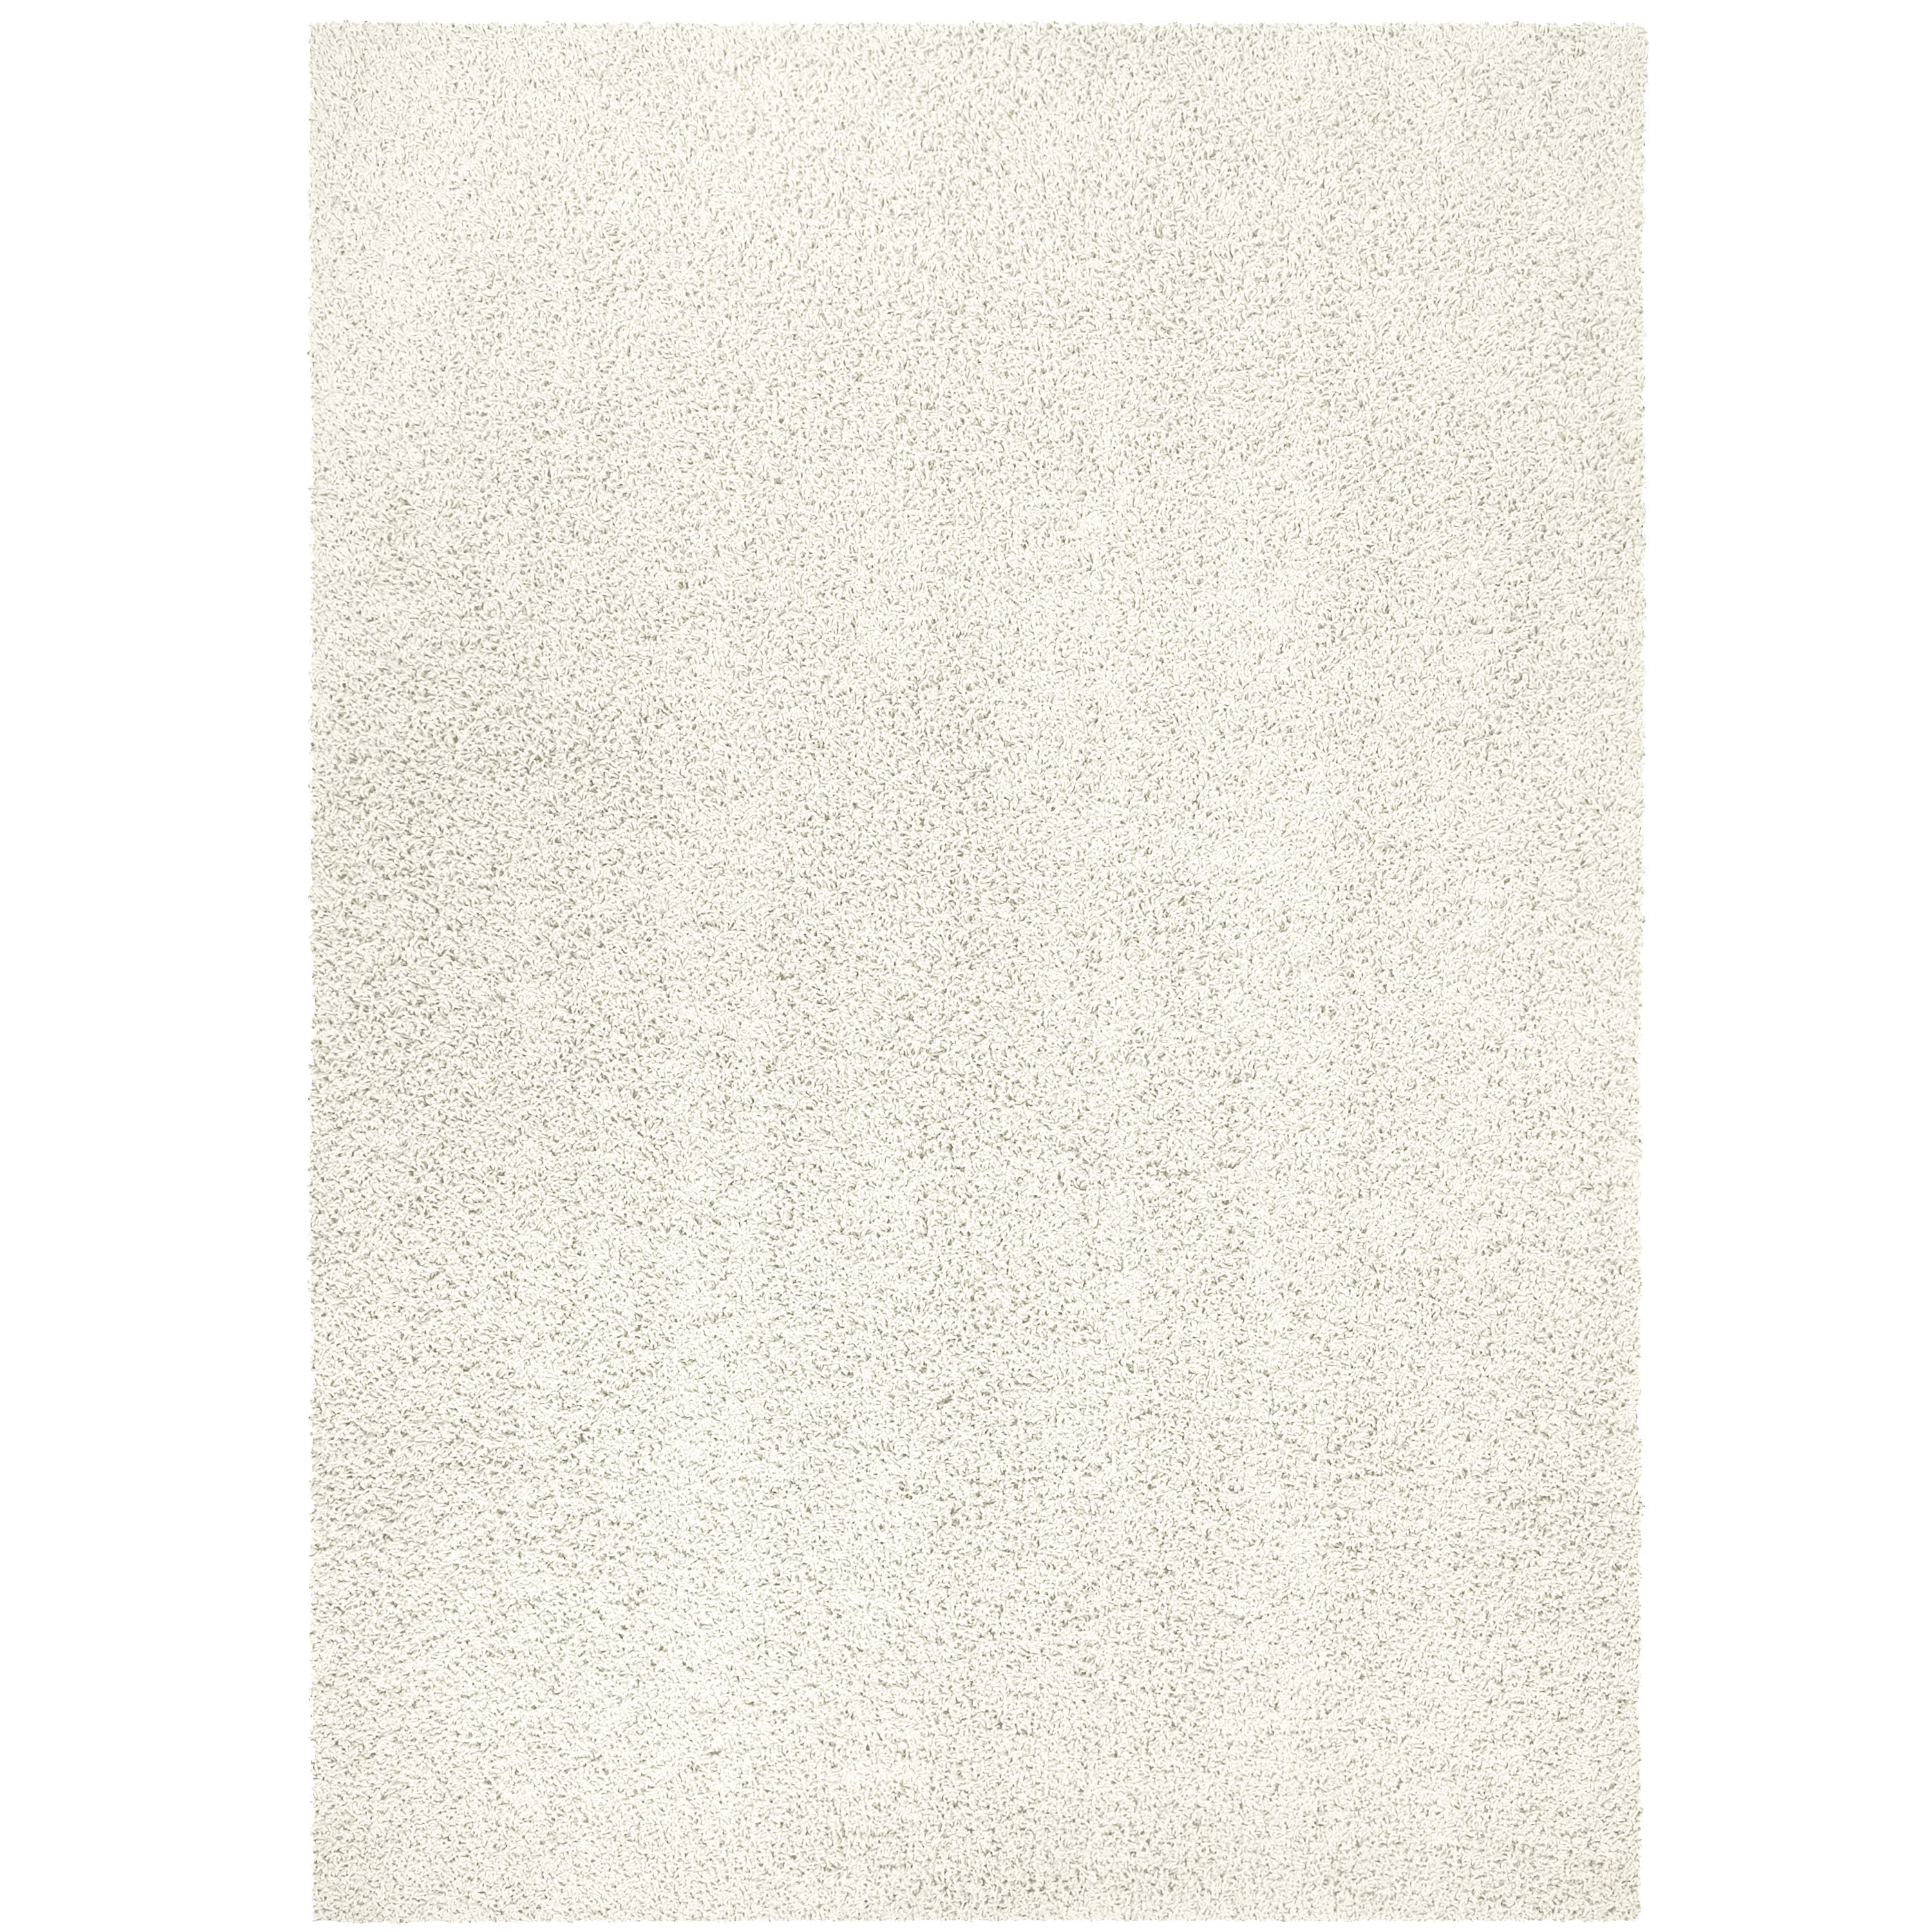 Mainstays Solid Casual Ivory Shag Area Rug, 5'x7'